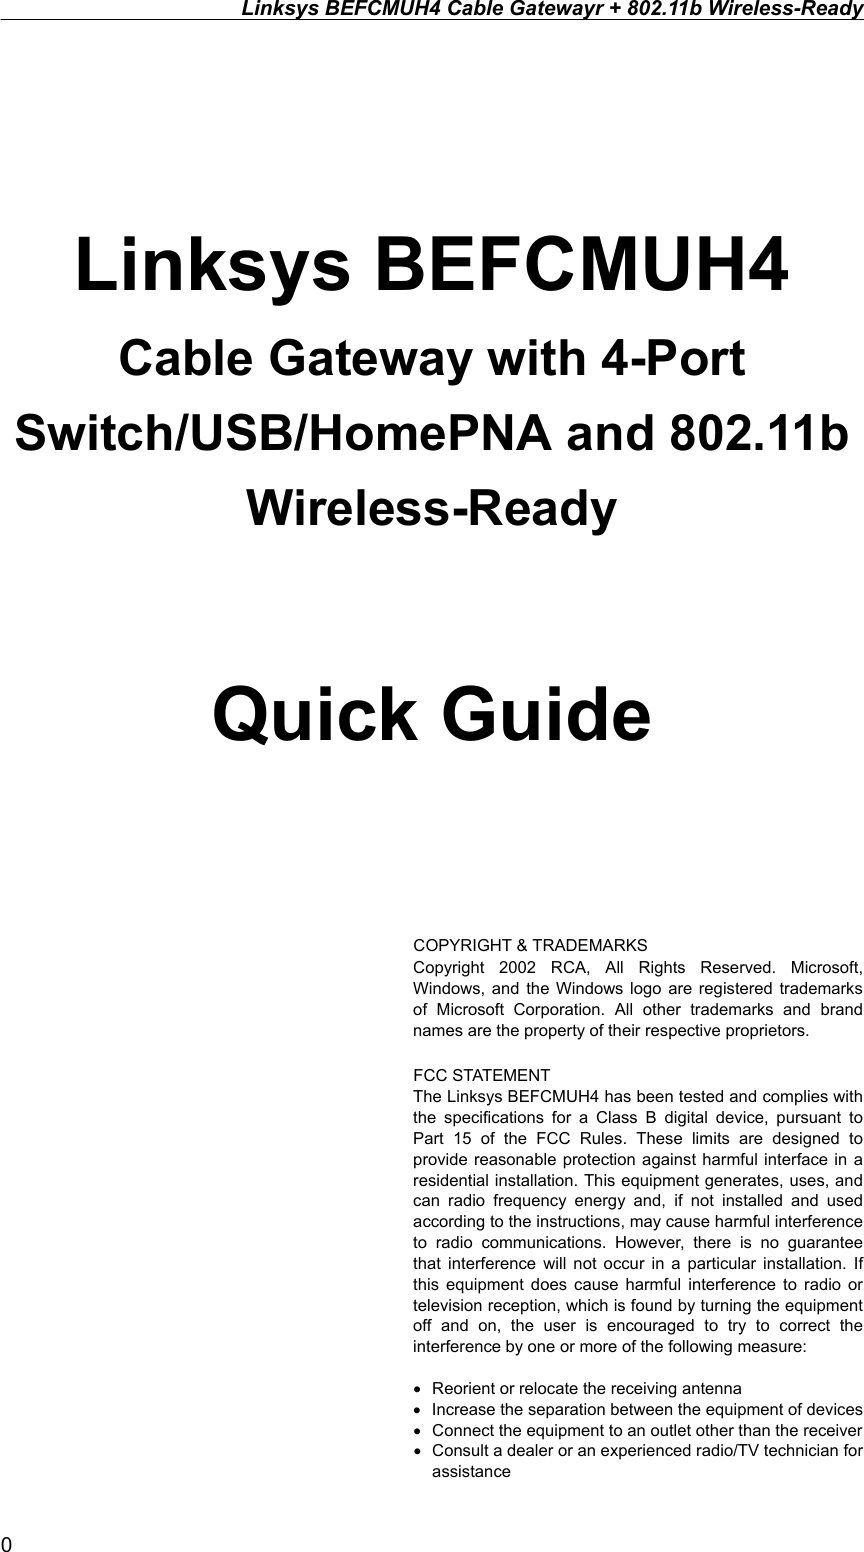 Linksys BEFCMUH4 Cable Gatewayr + 802.11b Wireless-Ready    Linksys BEFCMUH4 Cable Gateway with 4-Port Switch/USB/HomePNA and 802.11b Wireless-Ready  Quick Guide    COPYRIGHT &amp; TRADEMARKS Copyright 2002 RCA, All Rights Reserved. Microsoft, Windows, and the Windows logo are registered trademarks of Microsoft Corporation. All other trademarks and brand names are the property of their respective proprietors.  FCC STATEMENT The Linksys BEFCMUH4 has been tested and complies with the specifications for a Class B digital device, pursuant to Part 15 of the FCC Rules. These limits are designed to provide reasonable protection against harmful interface in a residential installation. This equipment generates, uses, and can radio frequency energy and, if not installed and used according to the instructions, may cause harmful interference to radio communications. However, there is no guarantee that interference will not occur in a particular installation. If this equipment does cause harmful interference to radio or television reception, which is found by turning the equipment off and on, the user is encouraged to try to correct the interference by one or more of the following measure:  •  Reorient or relocate the receiving antenna •  Increase the separation between the equipment of devices •  Connect the equipment to an outlet other than the receiver   •  Consult a dealer or an experienced radio/TV technician for assistance 0 